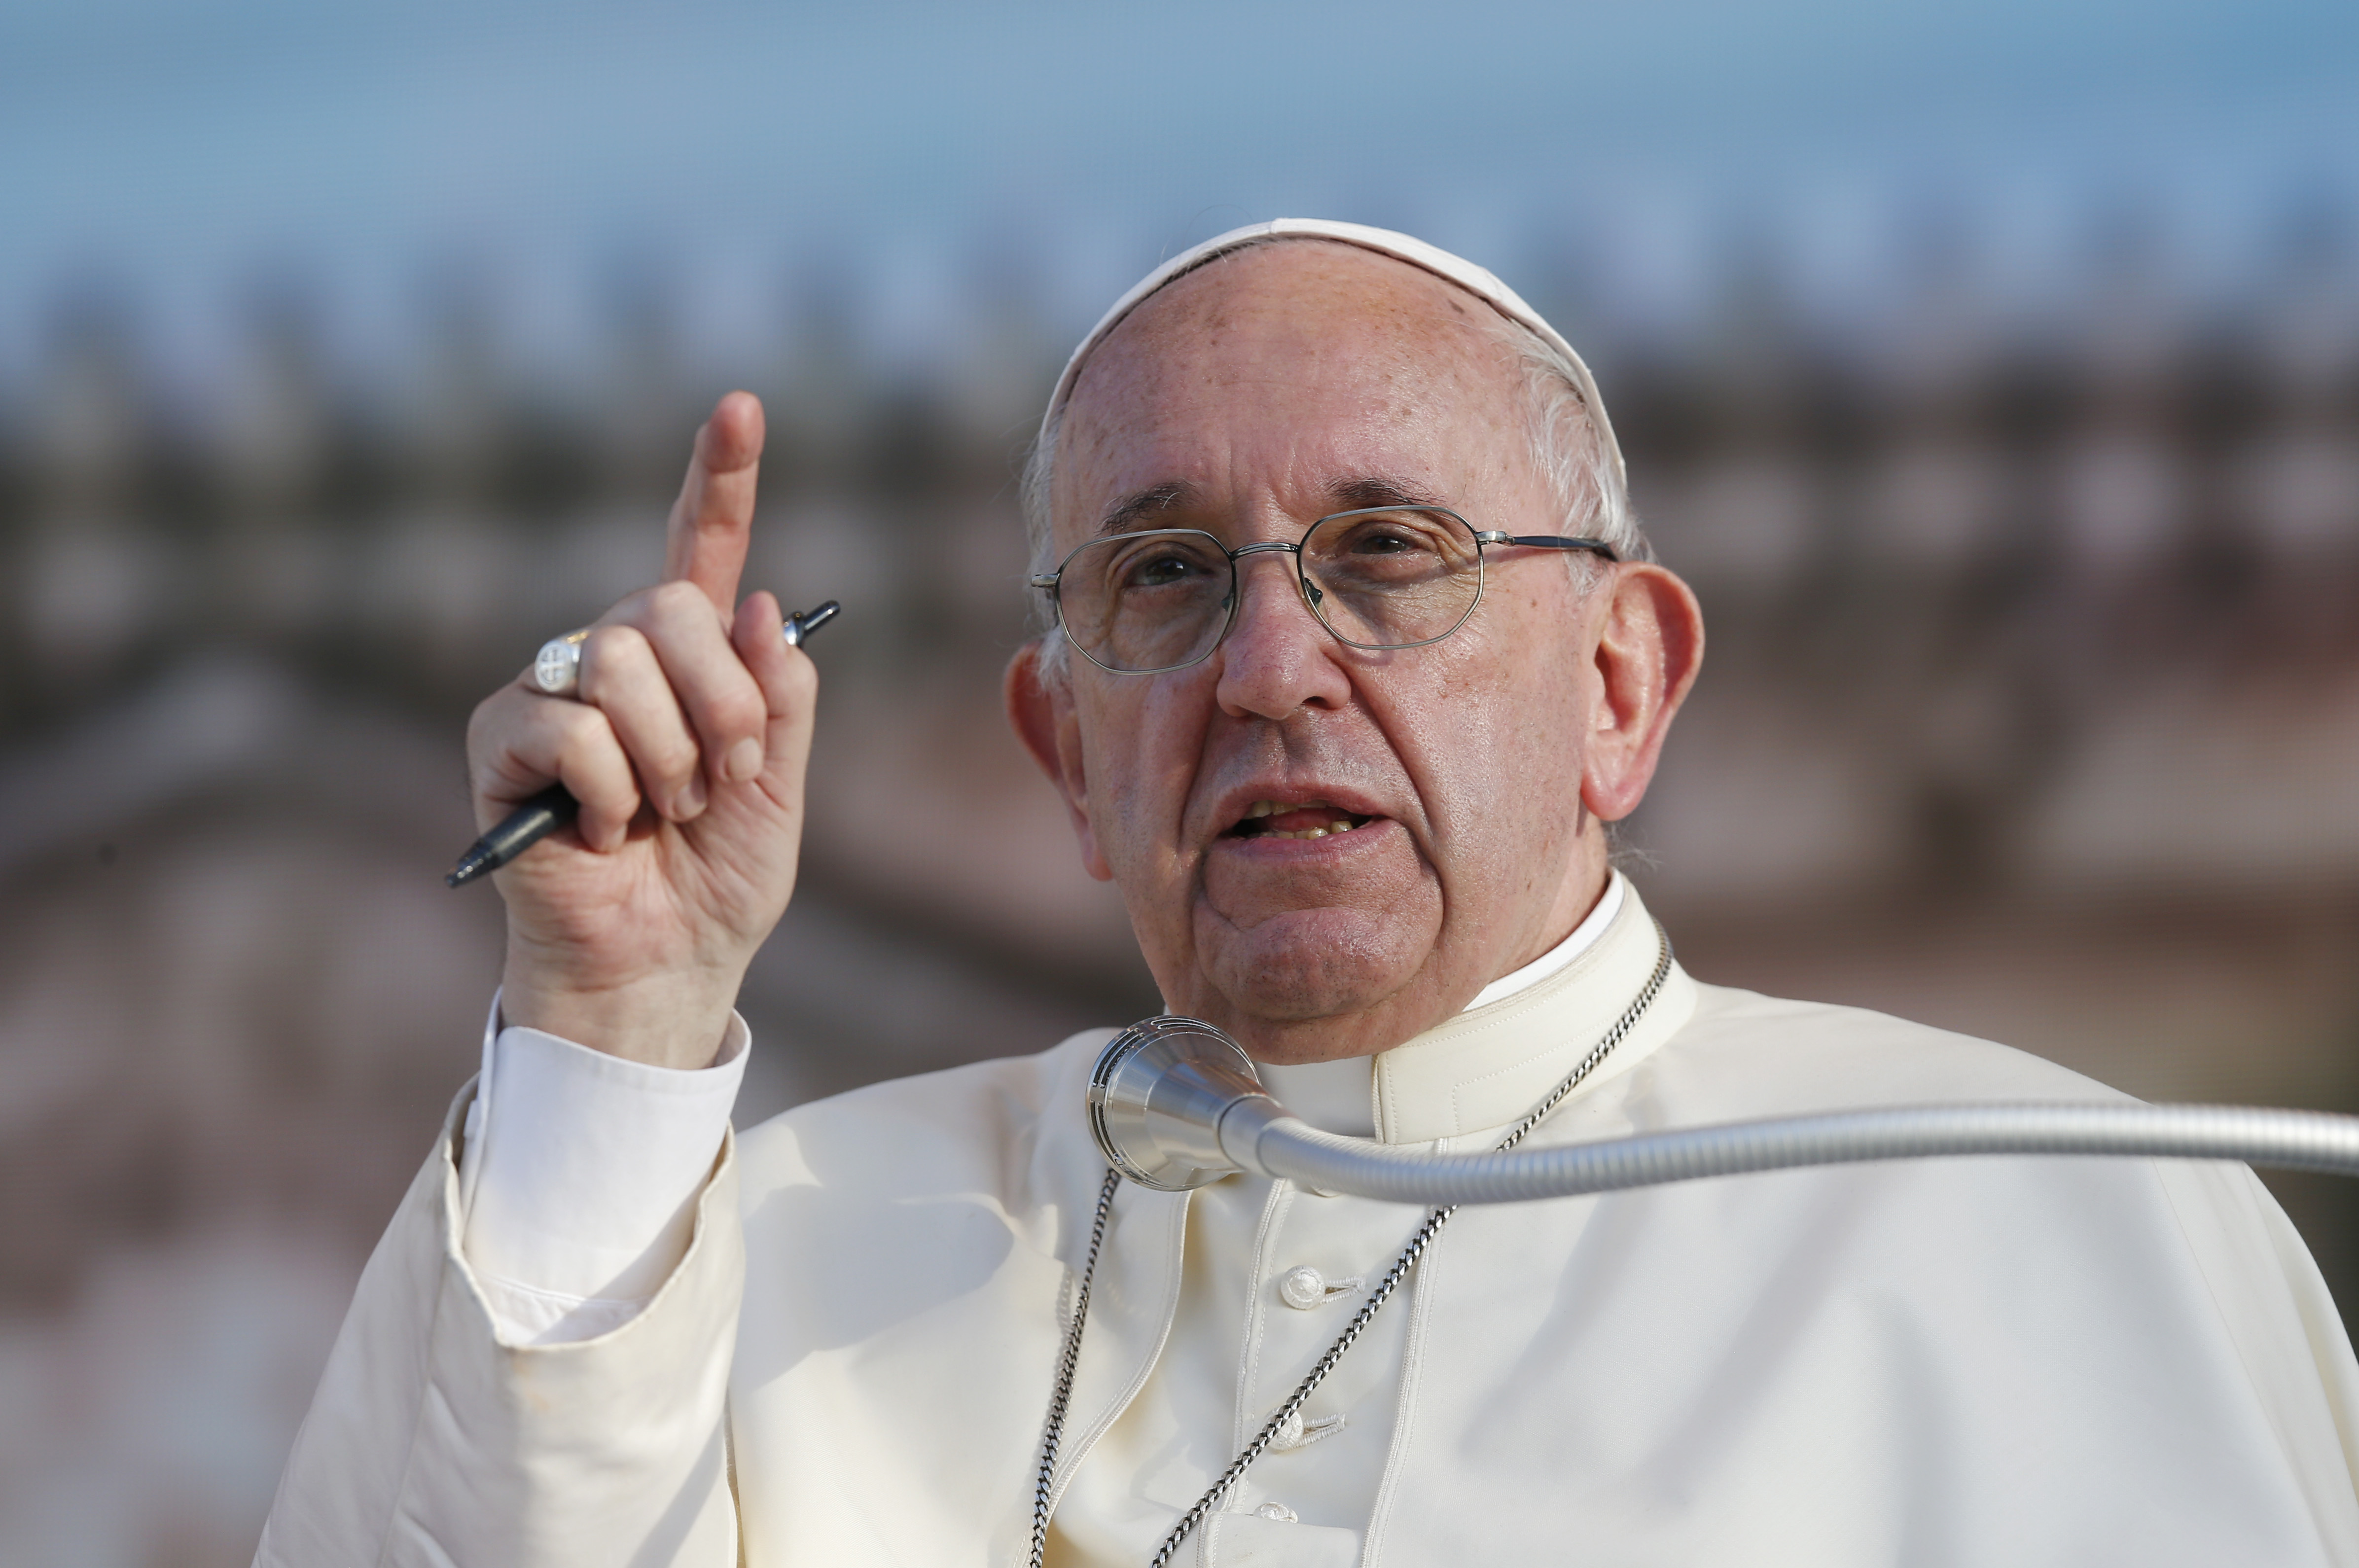 When devil is unleashed, humility is the only weapon, pope says